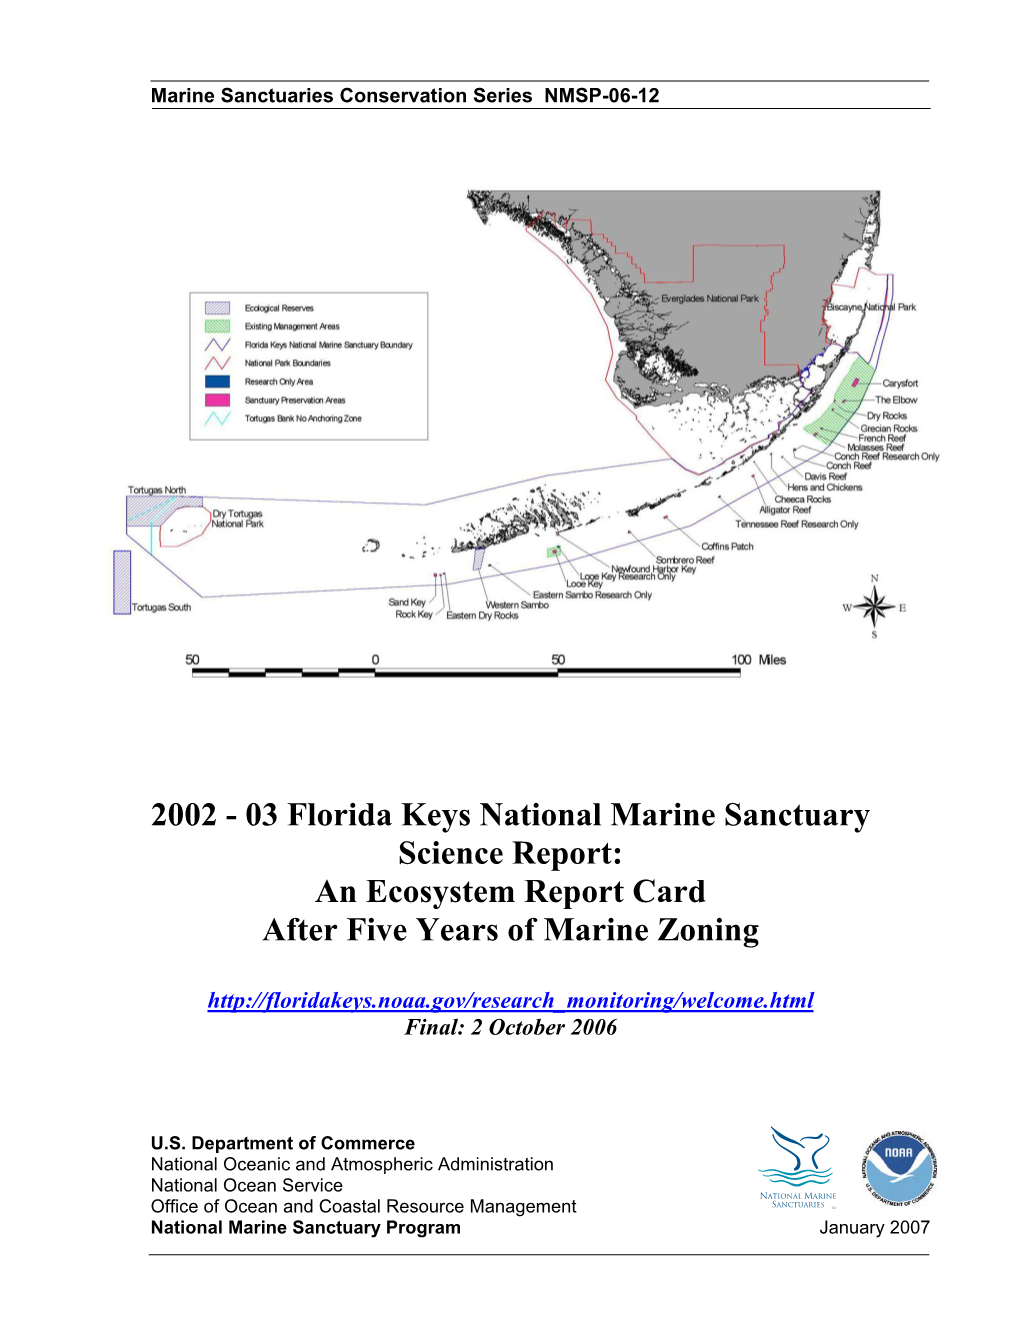 03 Florida Keys National Marine Sanctuary Science Report: an Ecosystem Report Card After Five Years of Marine Zoning